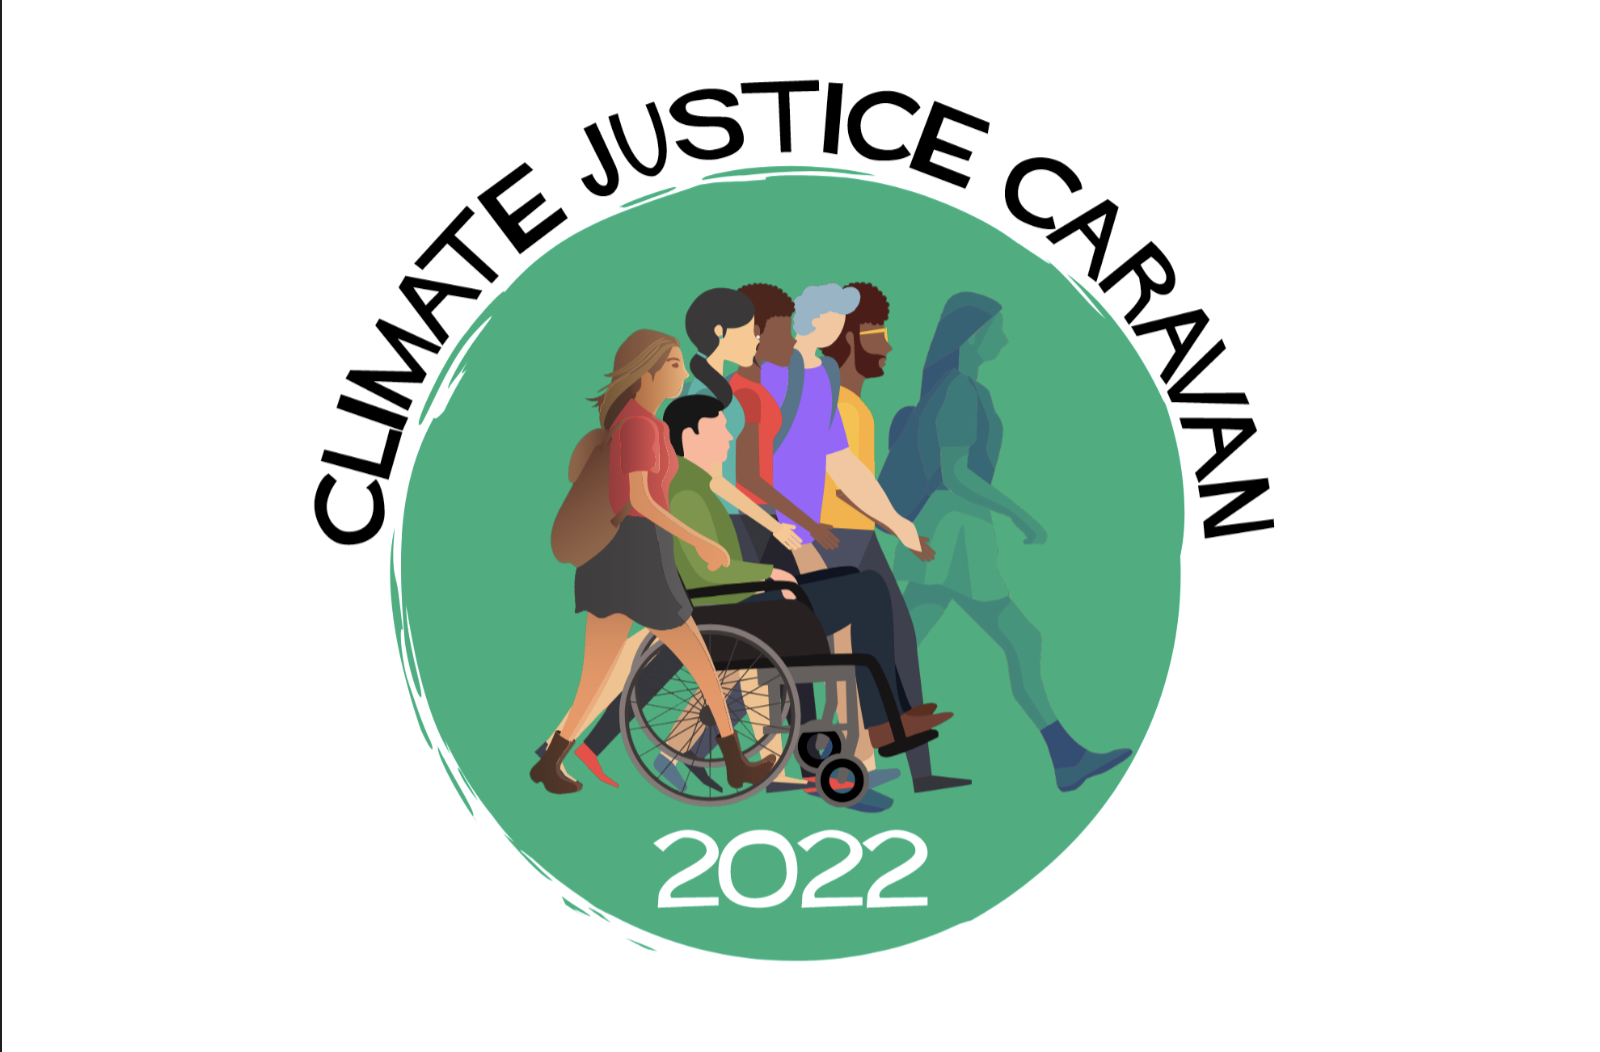 Climate Justice Caravan - Environmental activists embarked on a nine-day journey across Munster, from Ennis to Tarbert, for climate justice and the rights of nature.